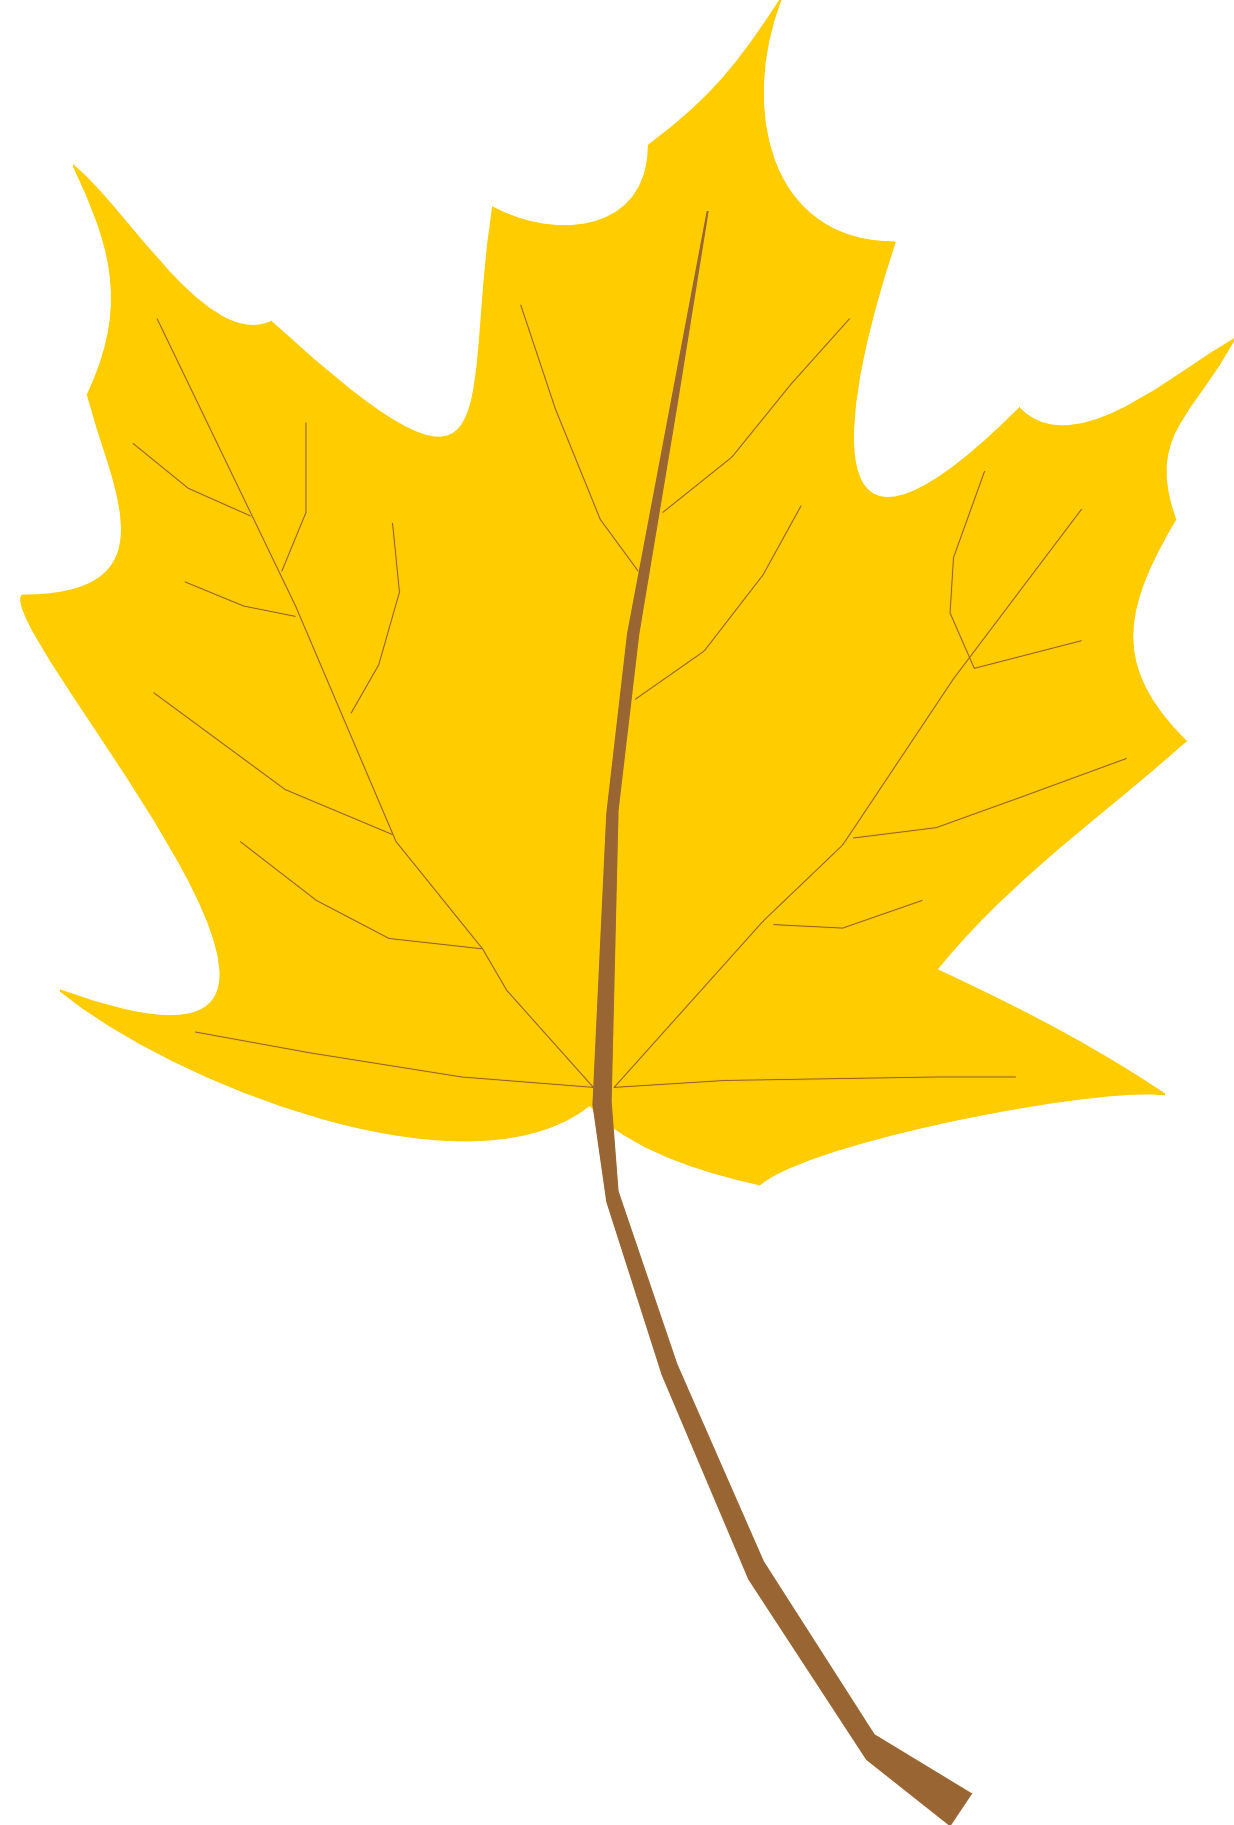 Yellow Leaves Clip Art free image